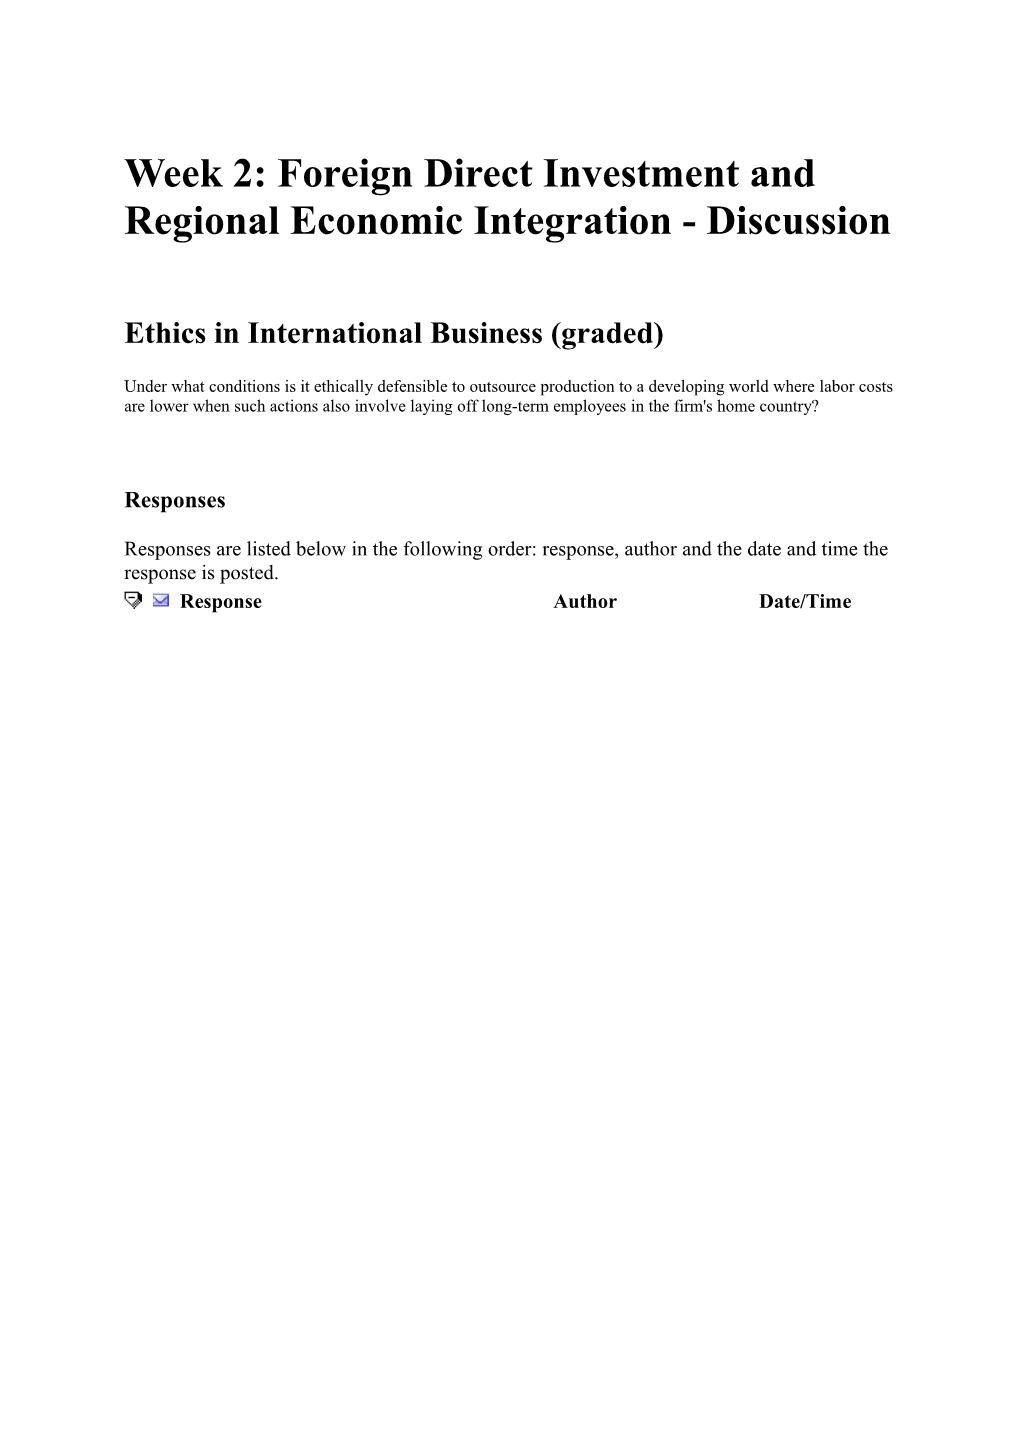 Week 2: Foreign Direct Investment and Regional Economic Integration - Discussion